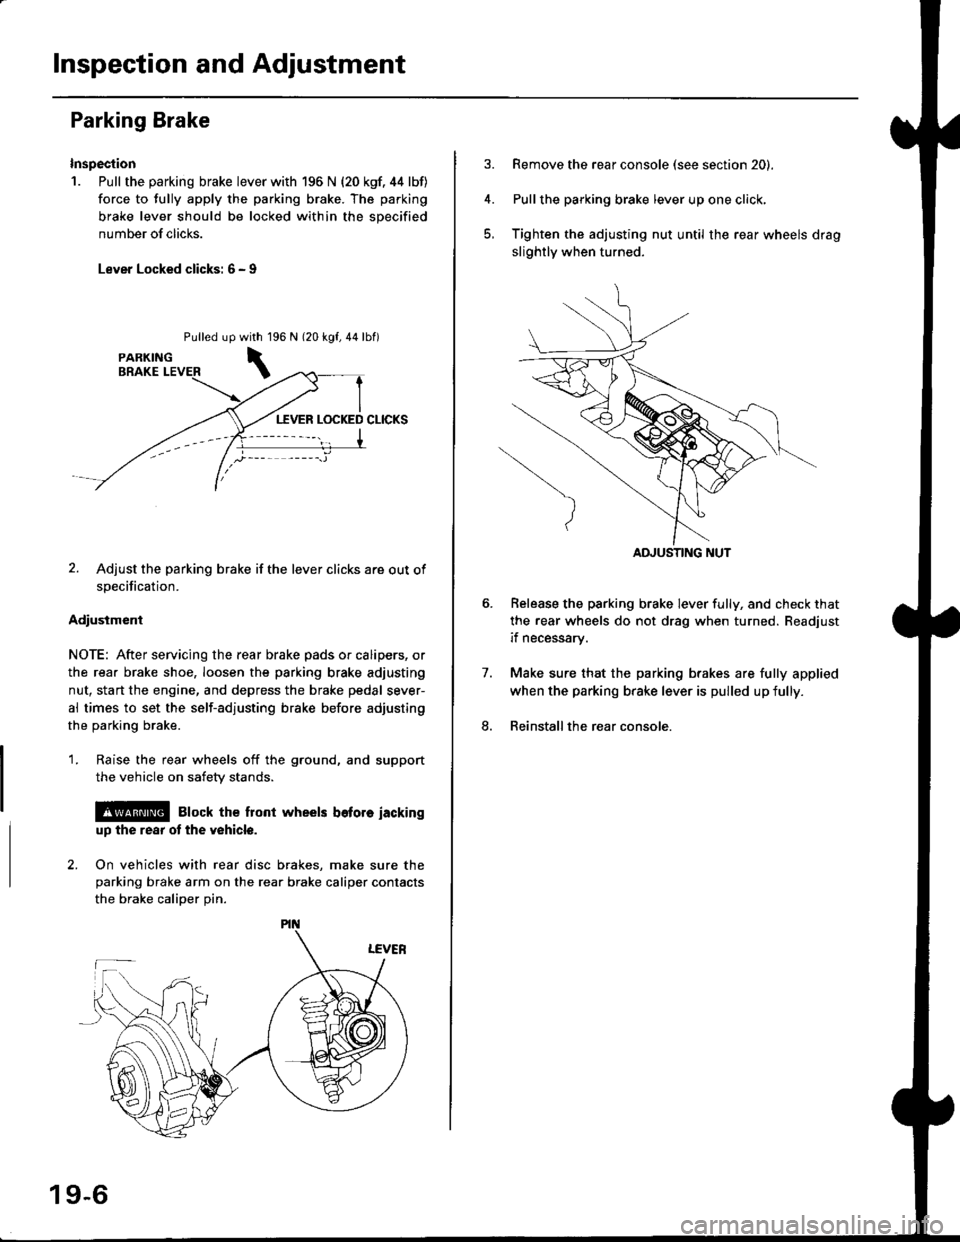 HONDA CIVIC 2000 6.G Workshop Manual Inspection and Adjustment
Parking Brake
Inspection
1. Pull the parking brake lever with 196 N {20 kgf. 44 lbf)
force to fully apply the parking brake. The parking
brake lever should be locked within t